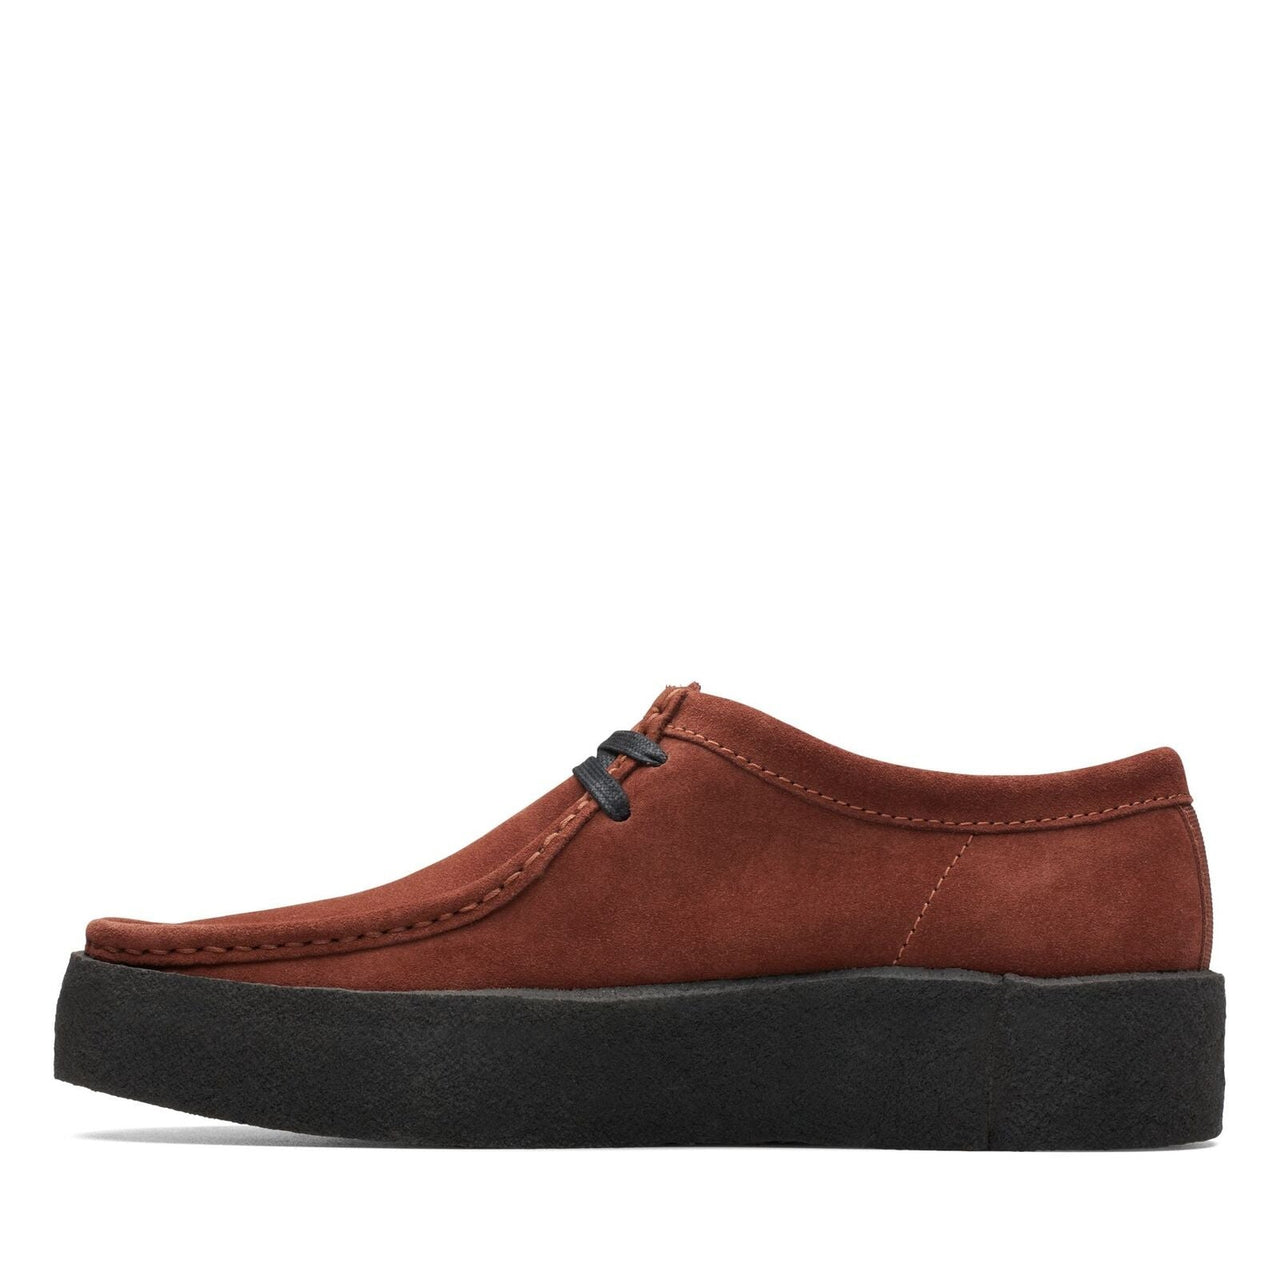  Close up of the Clarks Women's Wallabee Cup Rust Suede 26173658 sole 